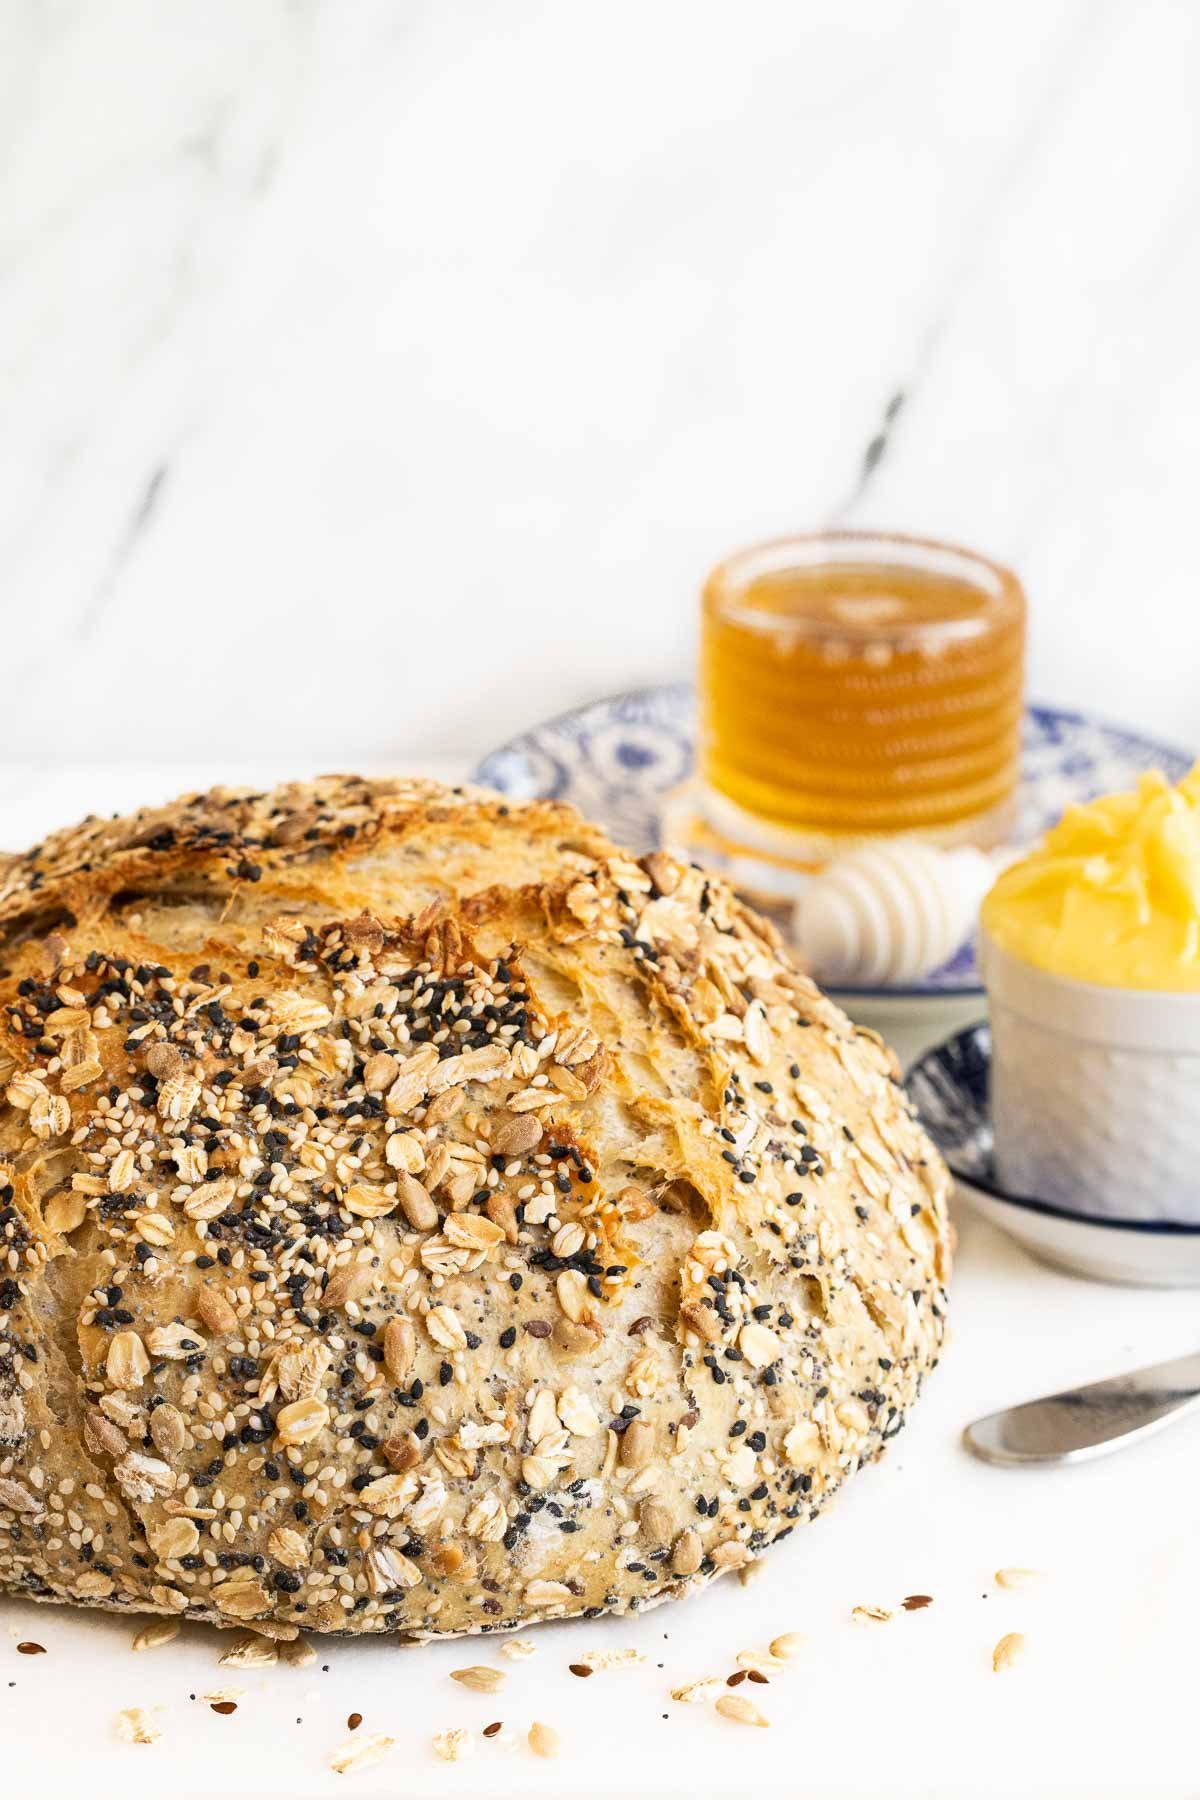 Vertical photo of a loaf of No-Knead Seeded Oatmeal Bread with jars of honey and butter against a white marble background.